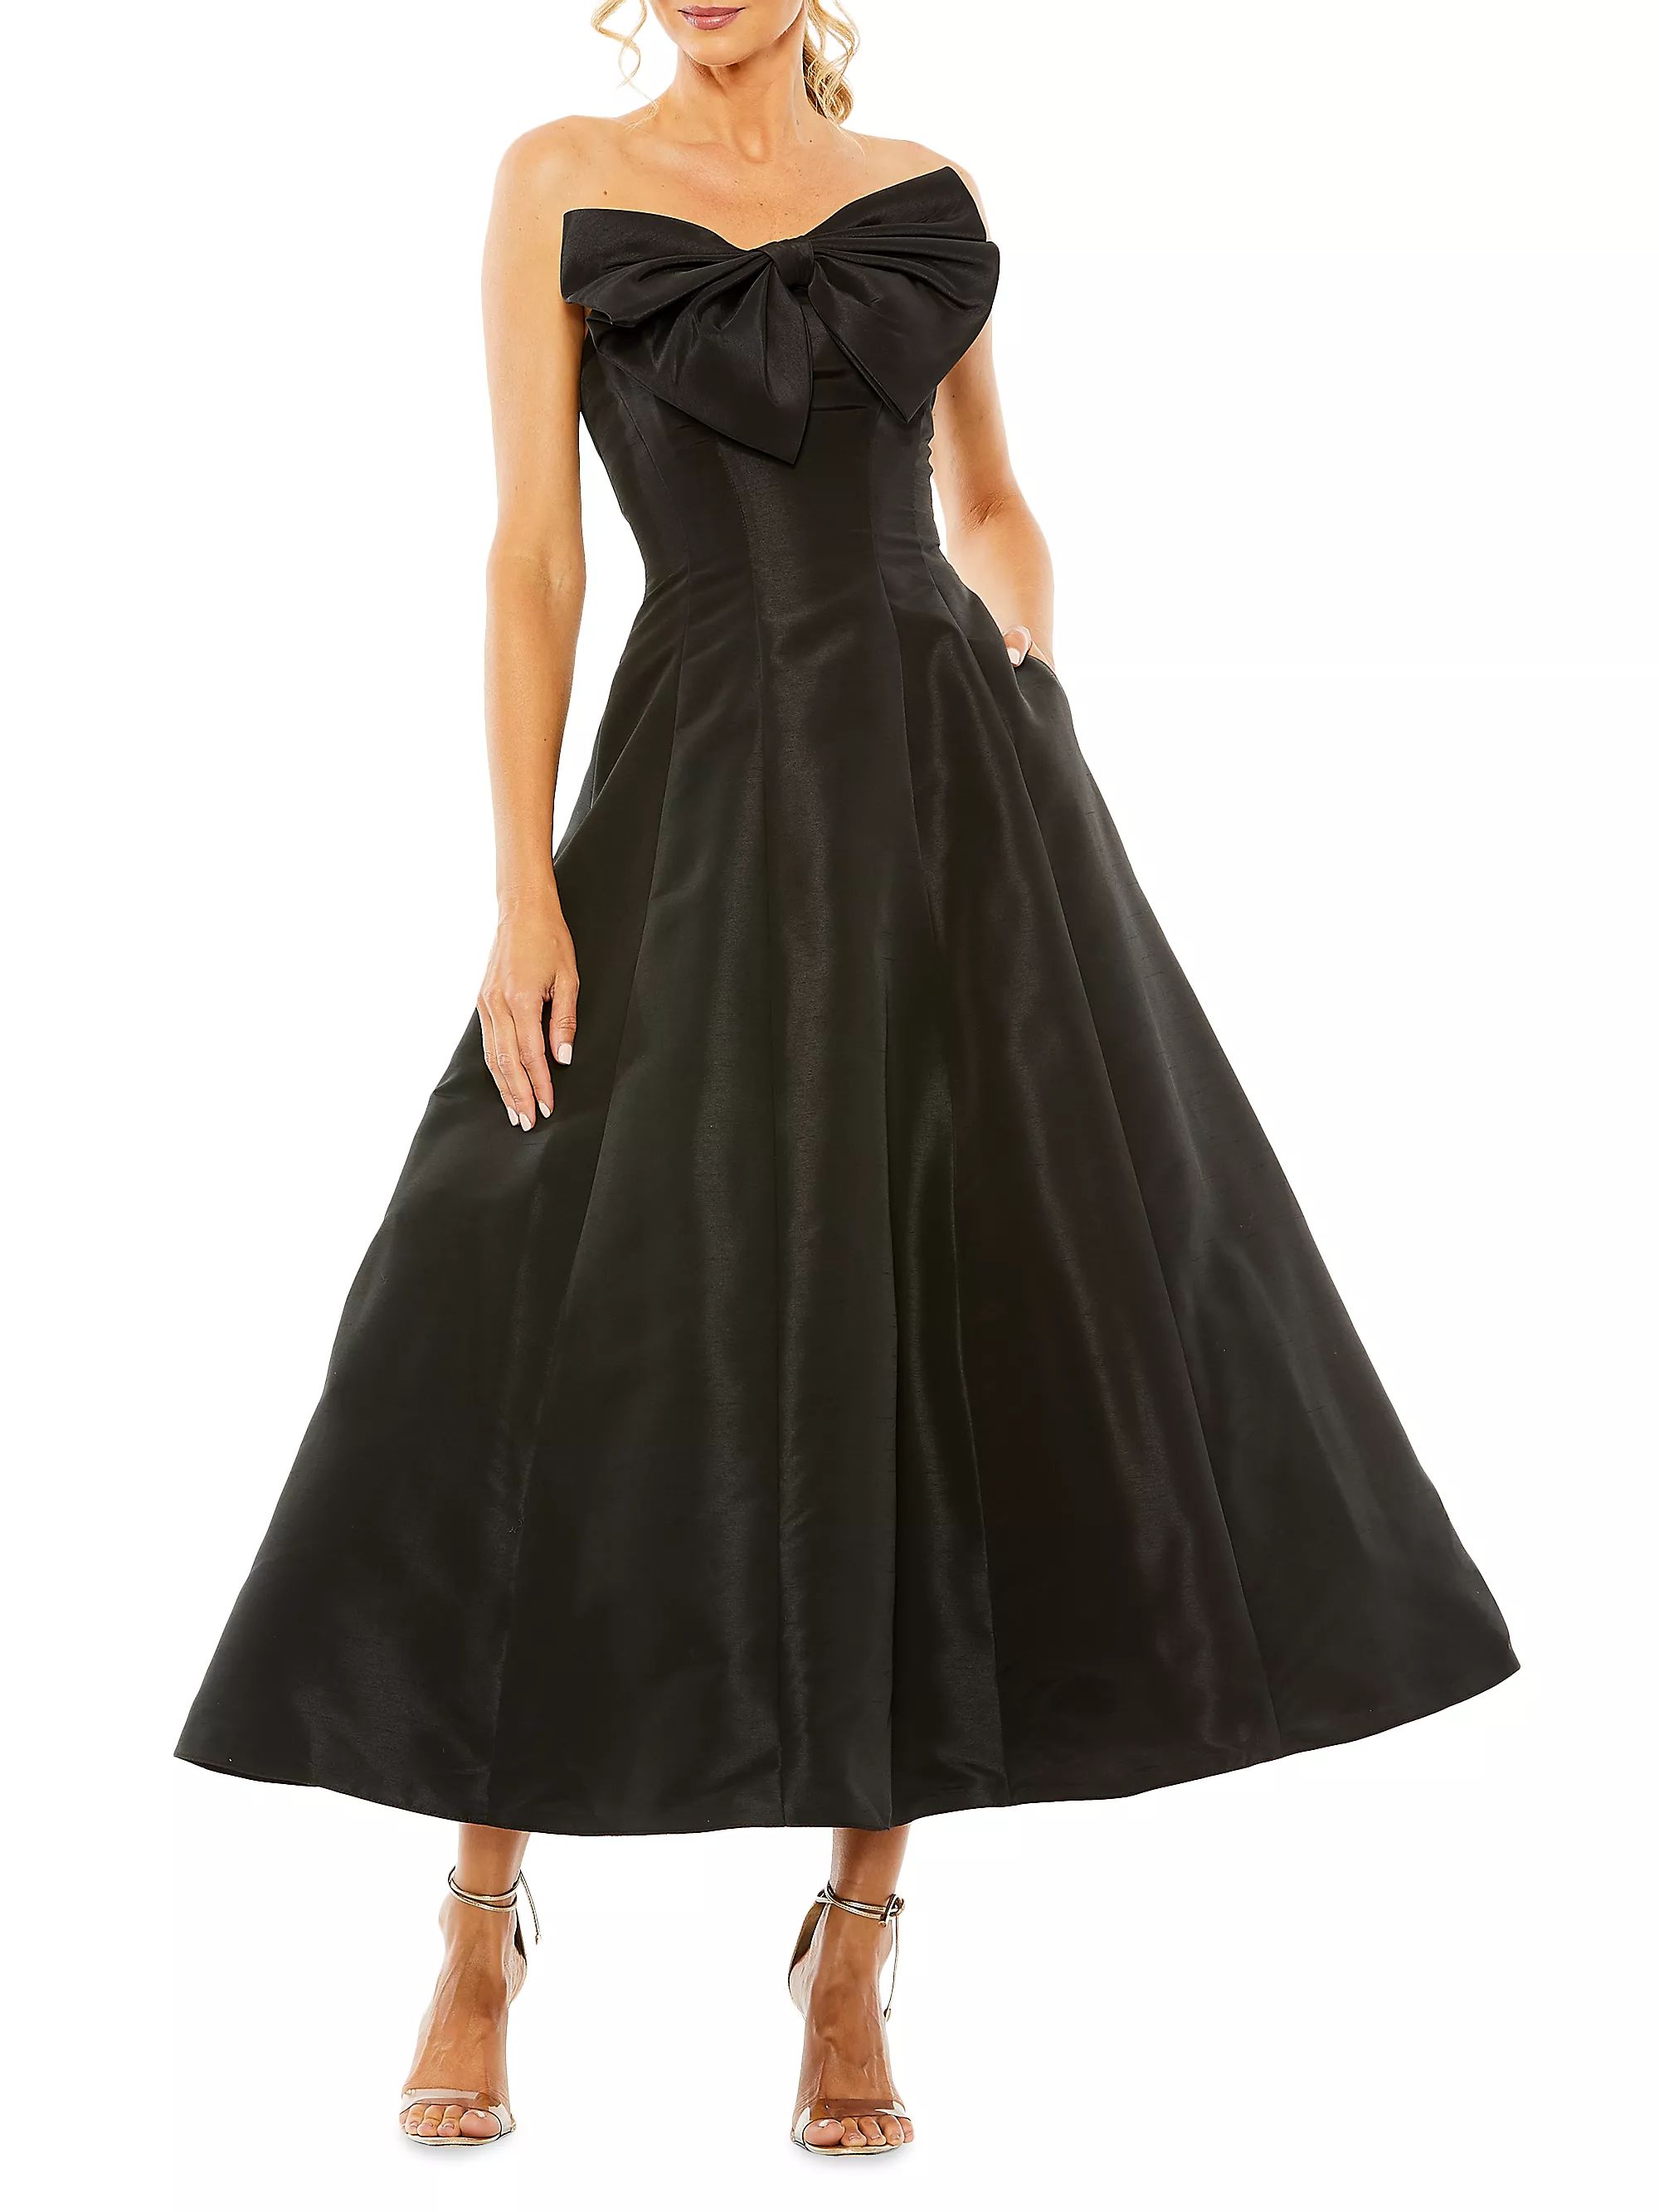 BlackStyleBLACKCANDY PINKFRENCH BLUEAll Evening GownsMac DuggalCocktail Bow Strapless Ballgown$39... | Saks Fifth Avenue